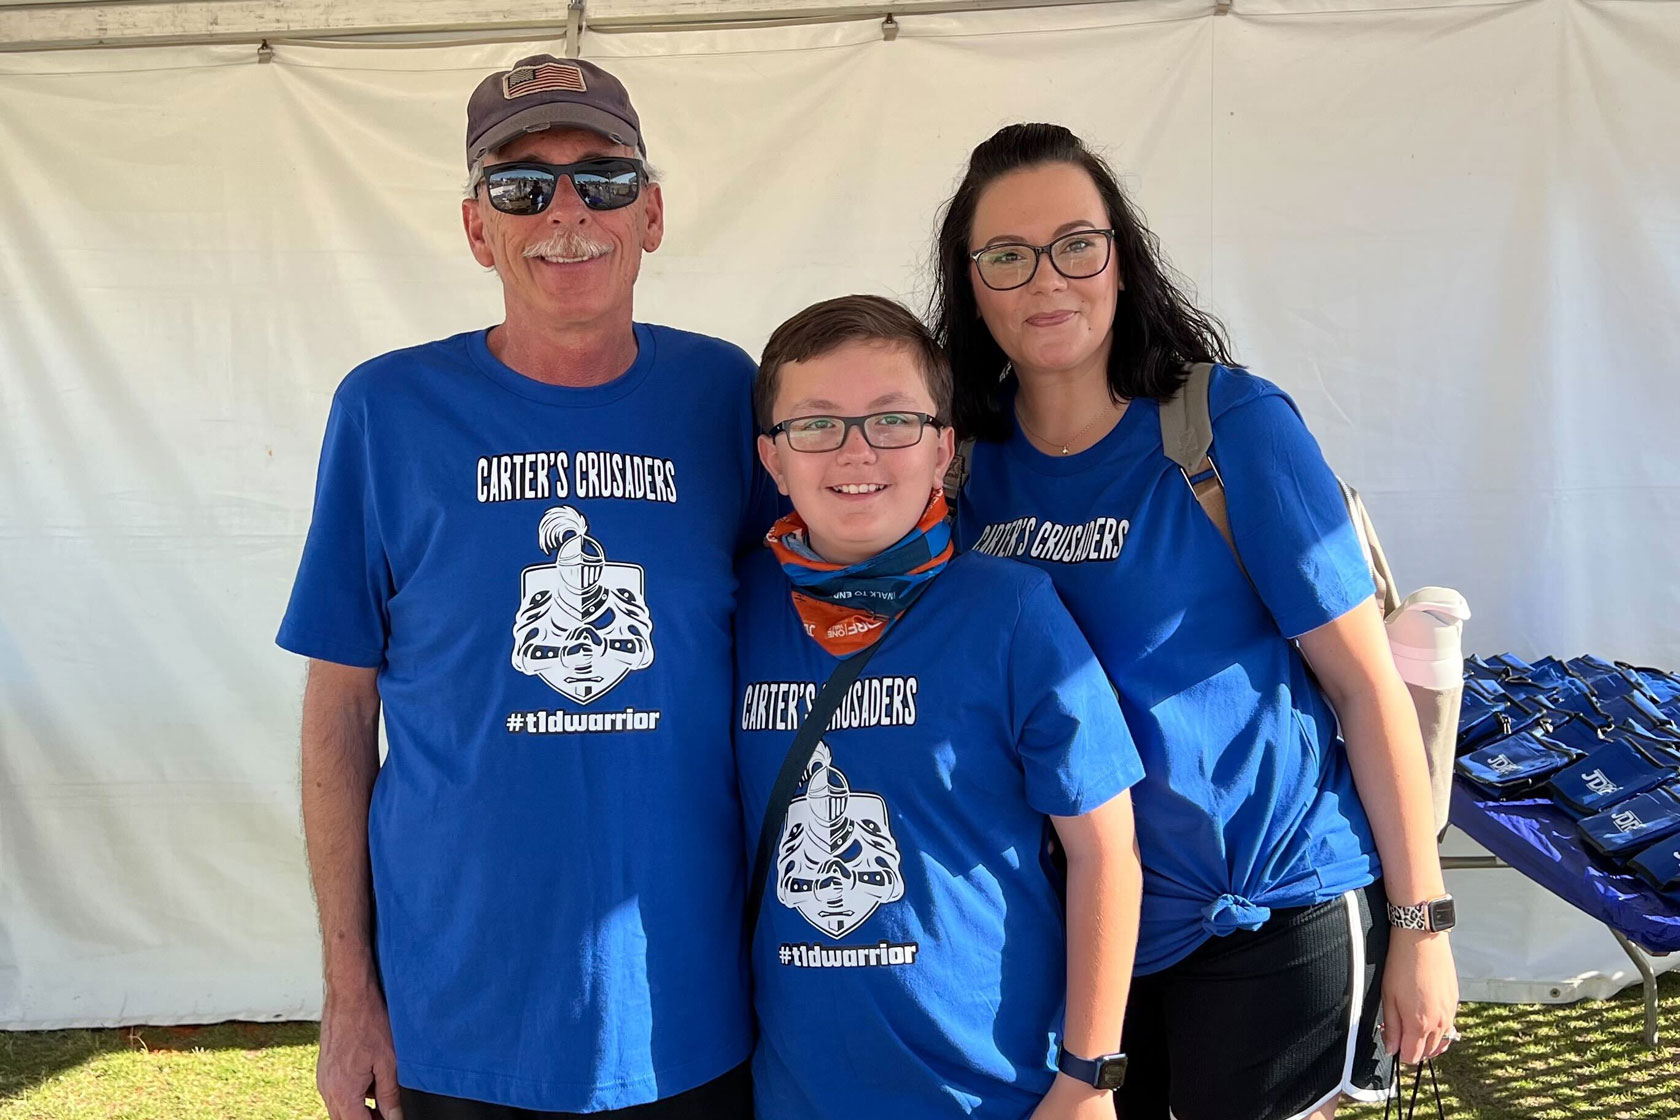 Jennifer Schuerman, right, is pictured with her husband, Todd, and son, Carter, in May 2022. (Photo credit: Jennifer Schuerman) 